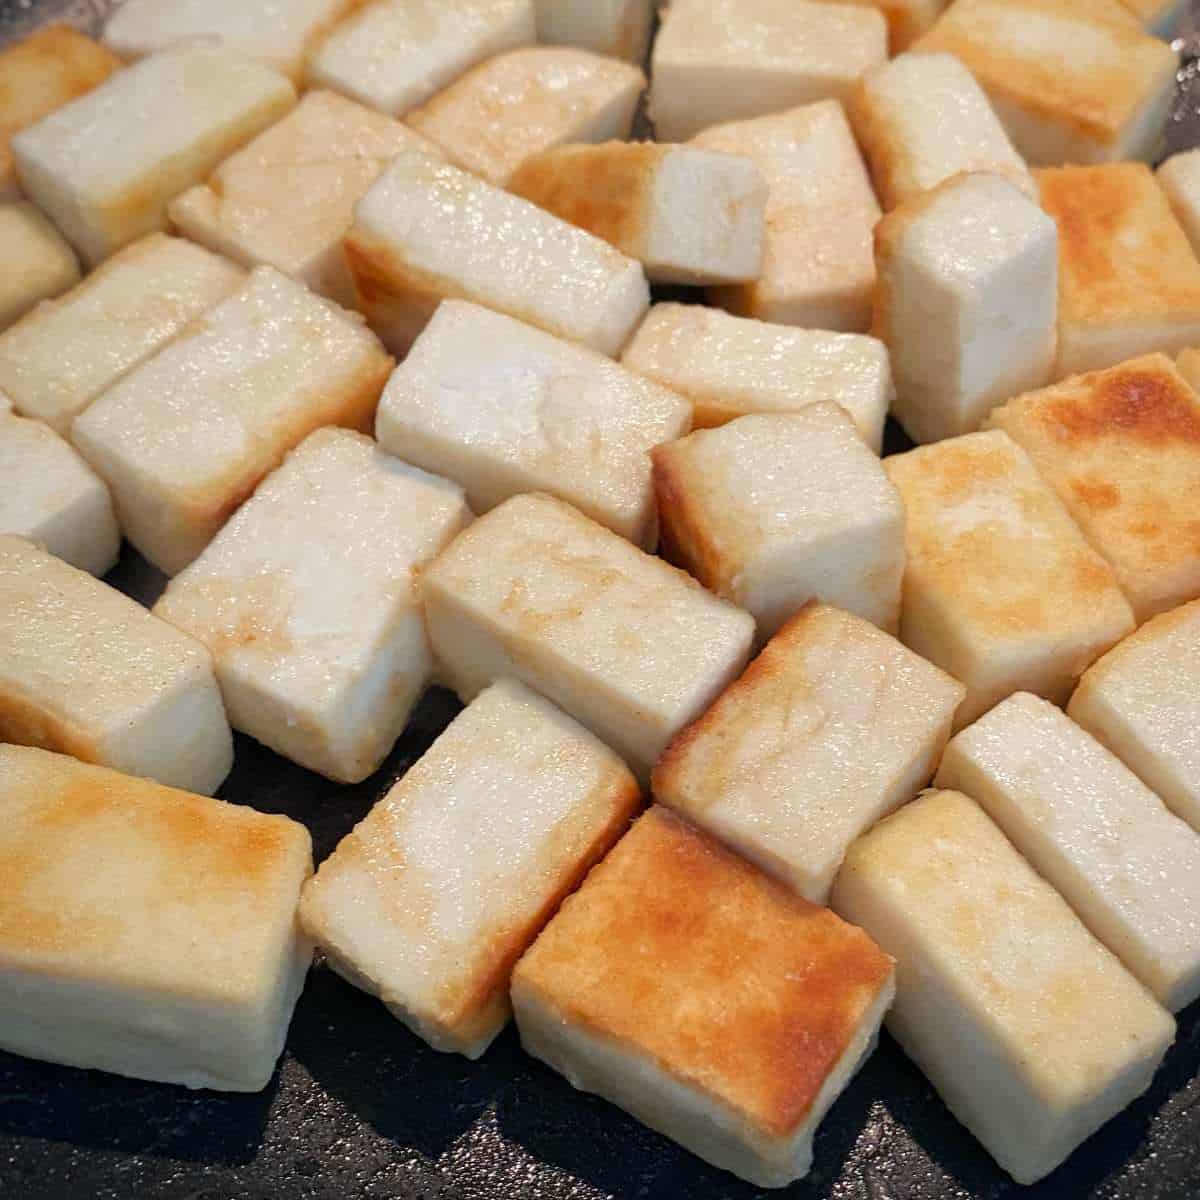 Cubes of tofu gently toasted in a fry pan.